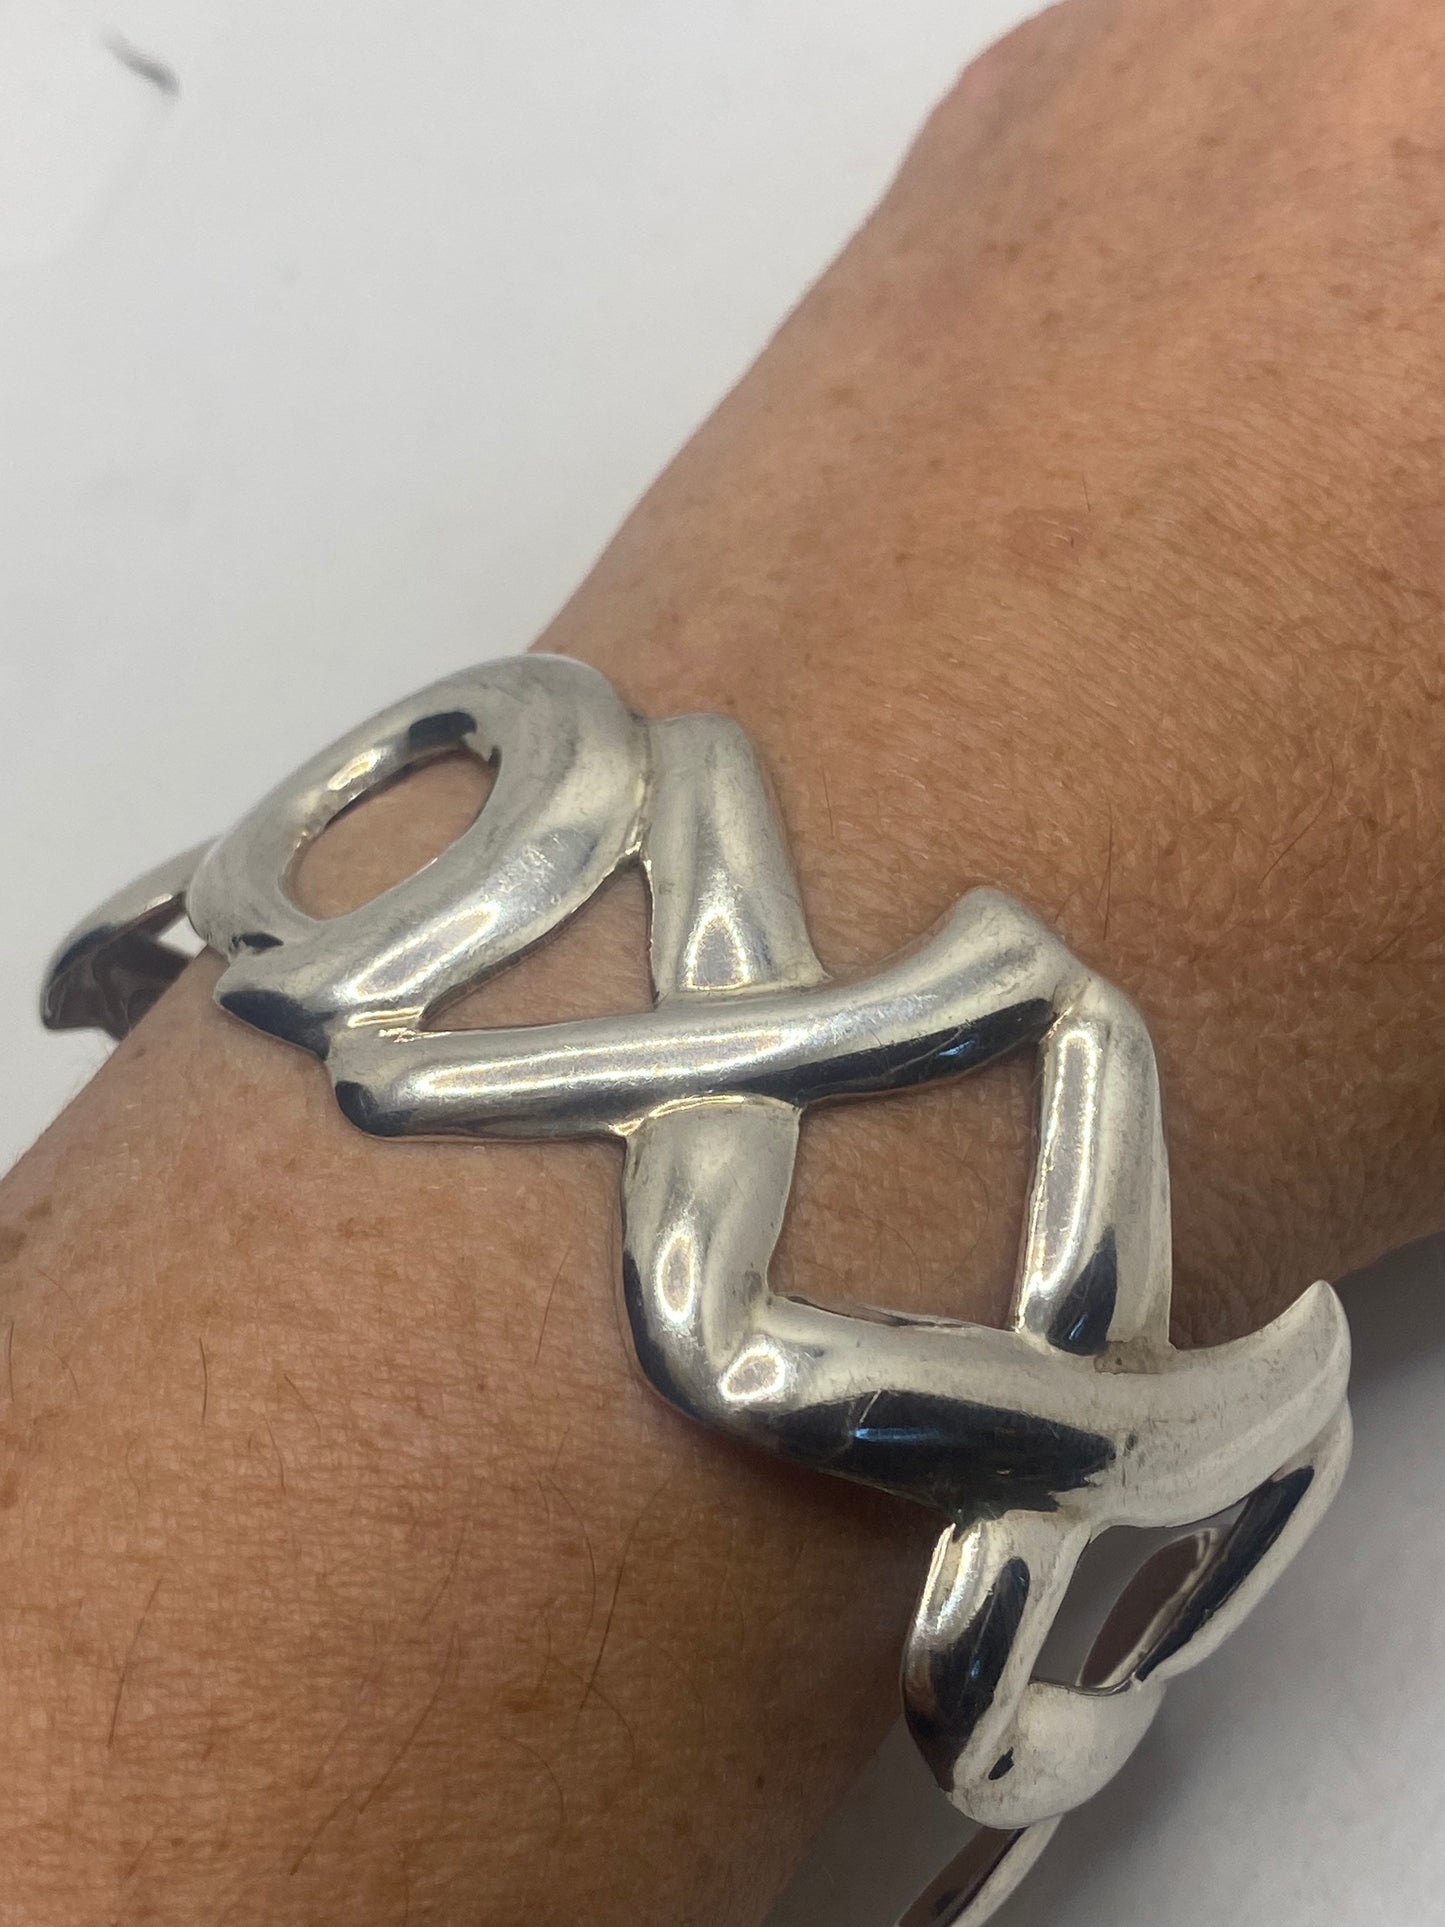 Vintage Higs and Kisses Bangle Cuff Bracelet 925 Sterling Silver